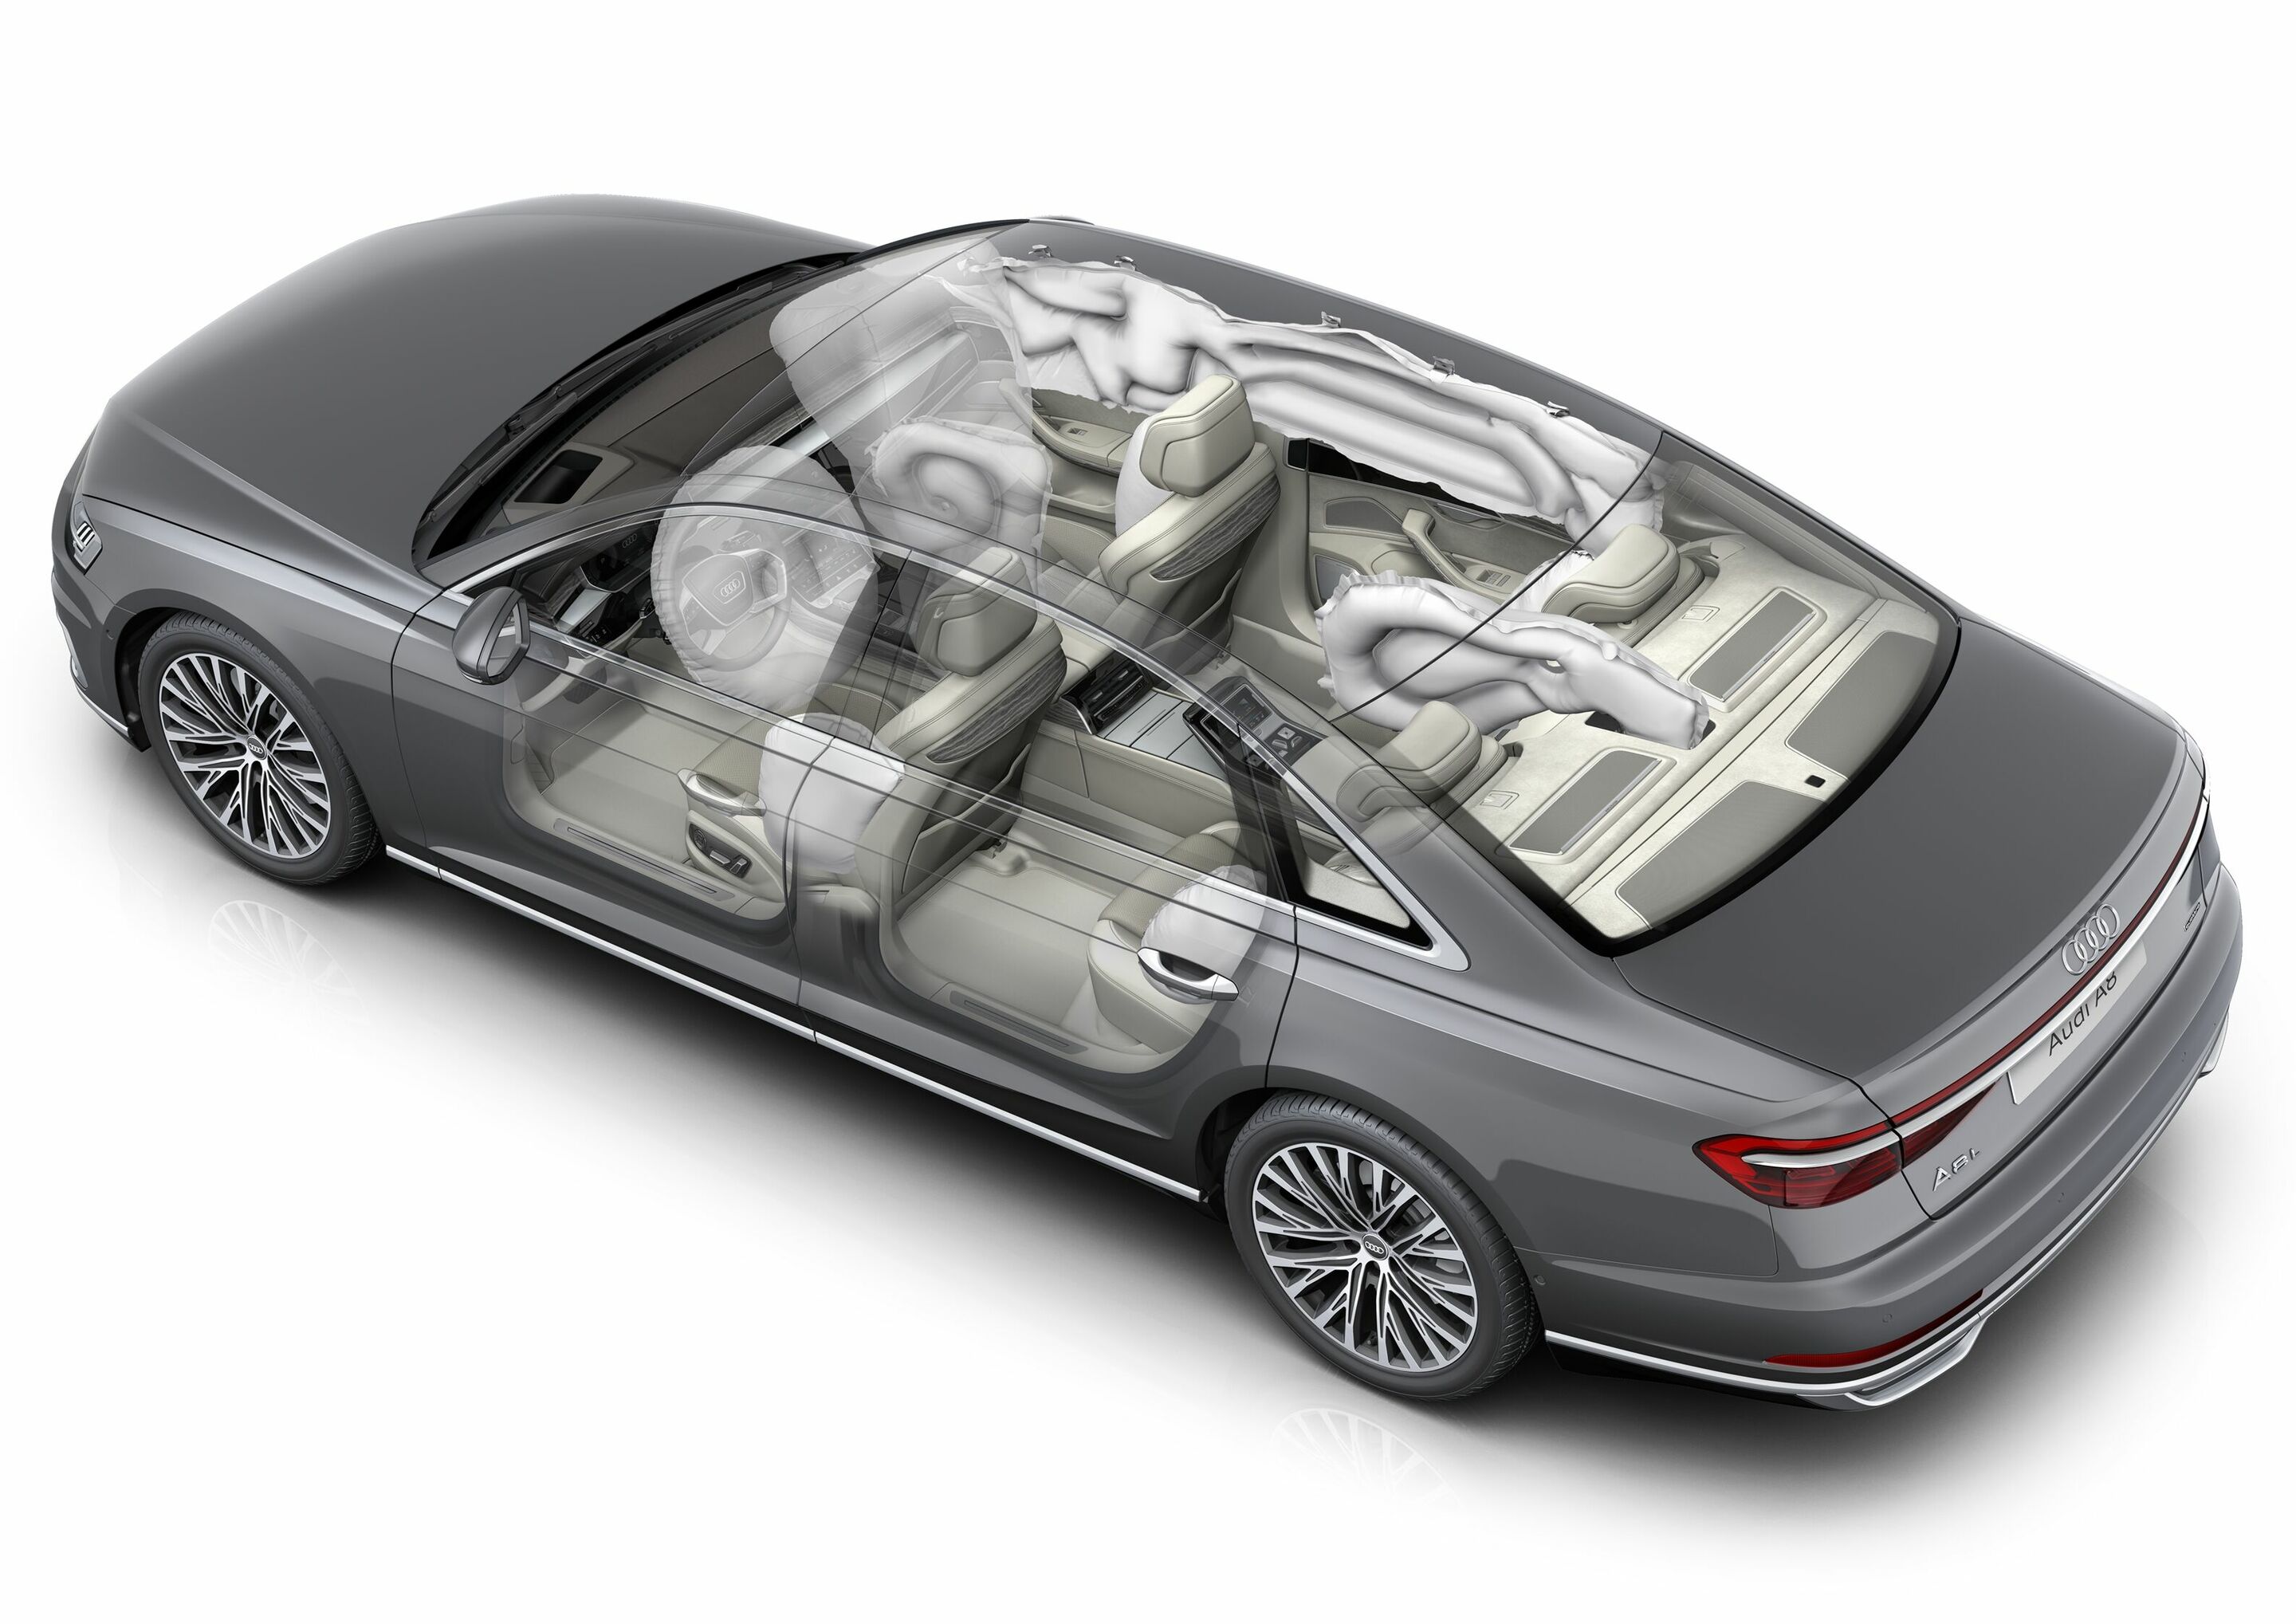 Airbags in the Audi A8 L